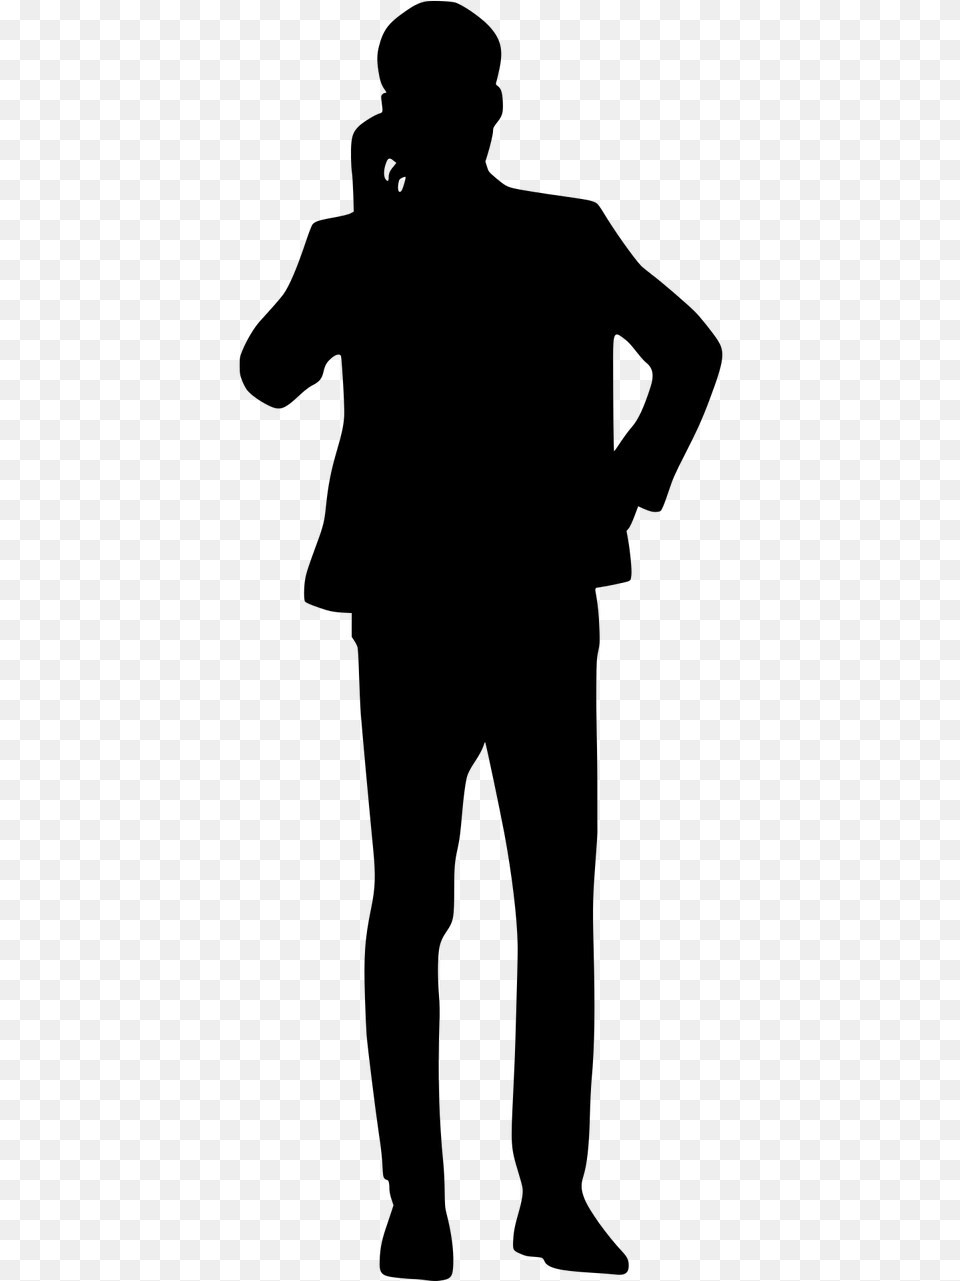 Silhouette Business Man Speaking Photo Man On Phone Silhouette, Gray Png Image